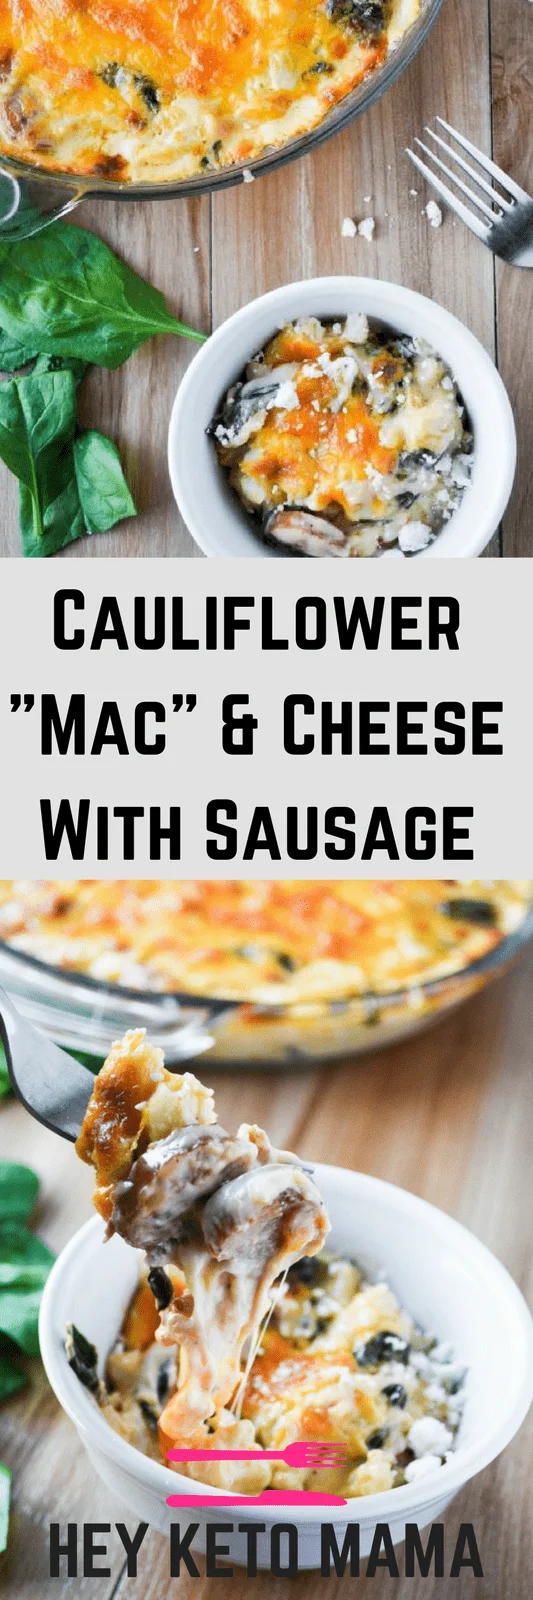 This Cauliflower Mac and Cheese is a delicious grain-free alternative to the traditional dish. Still as cheesy and gooey as ever! | heyketomama.com